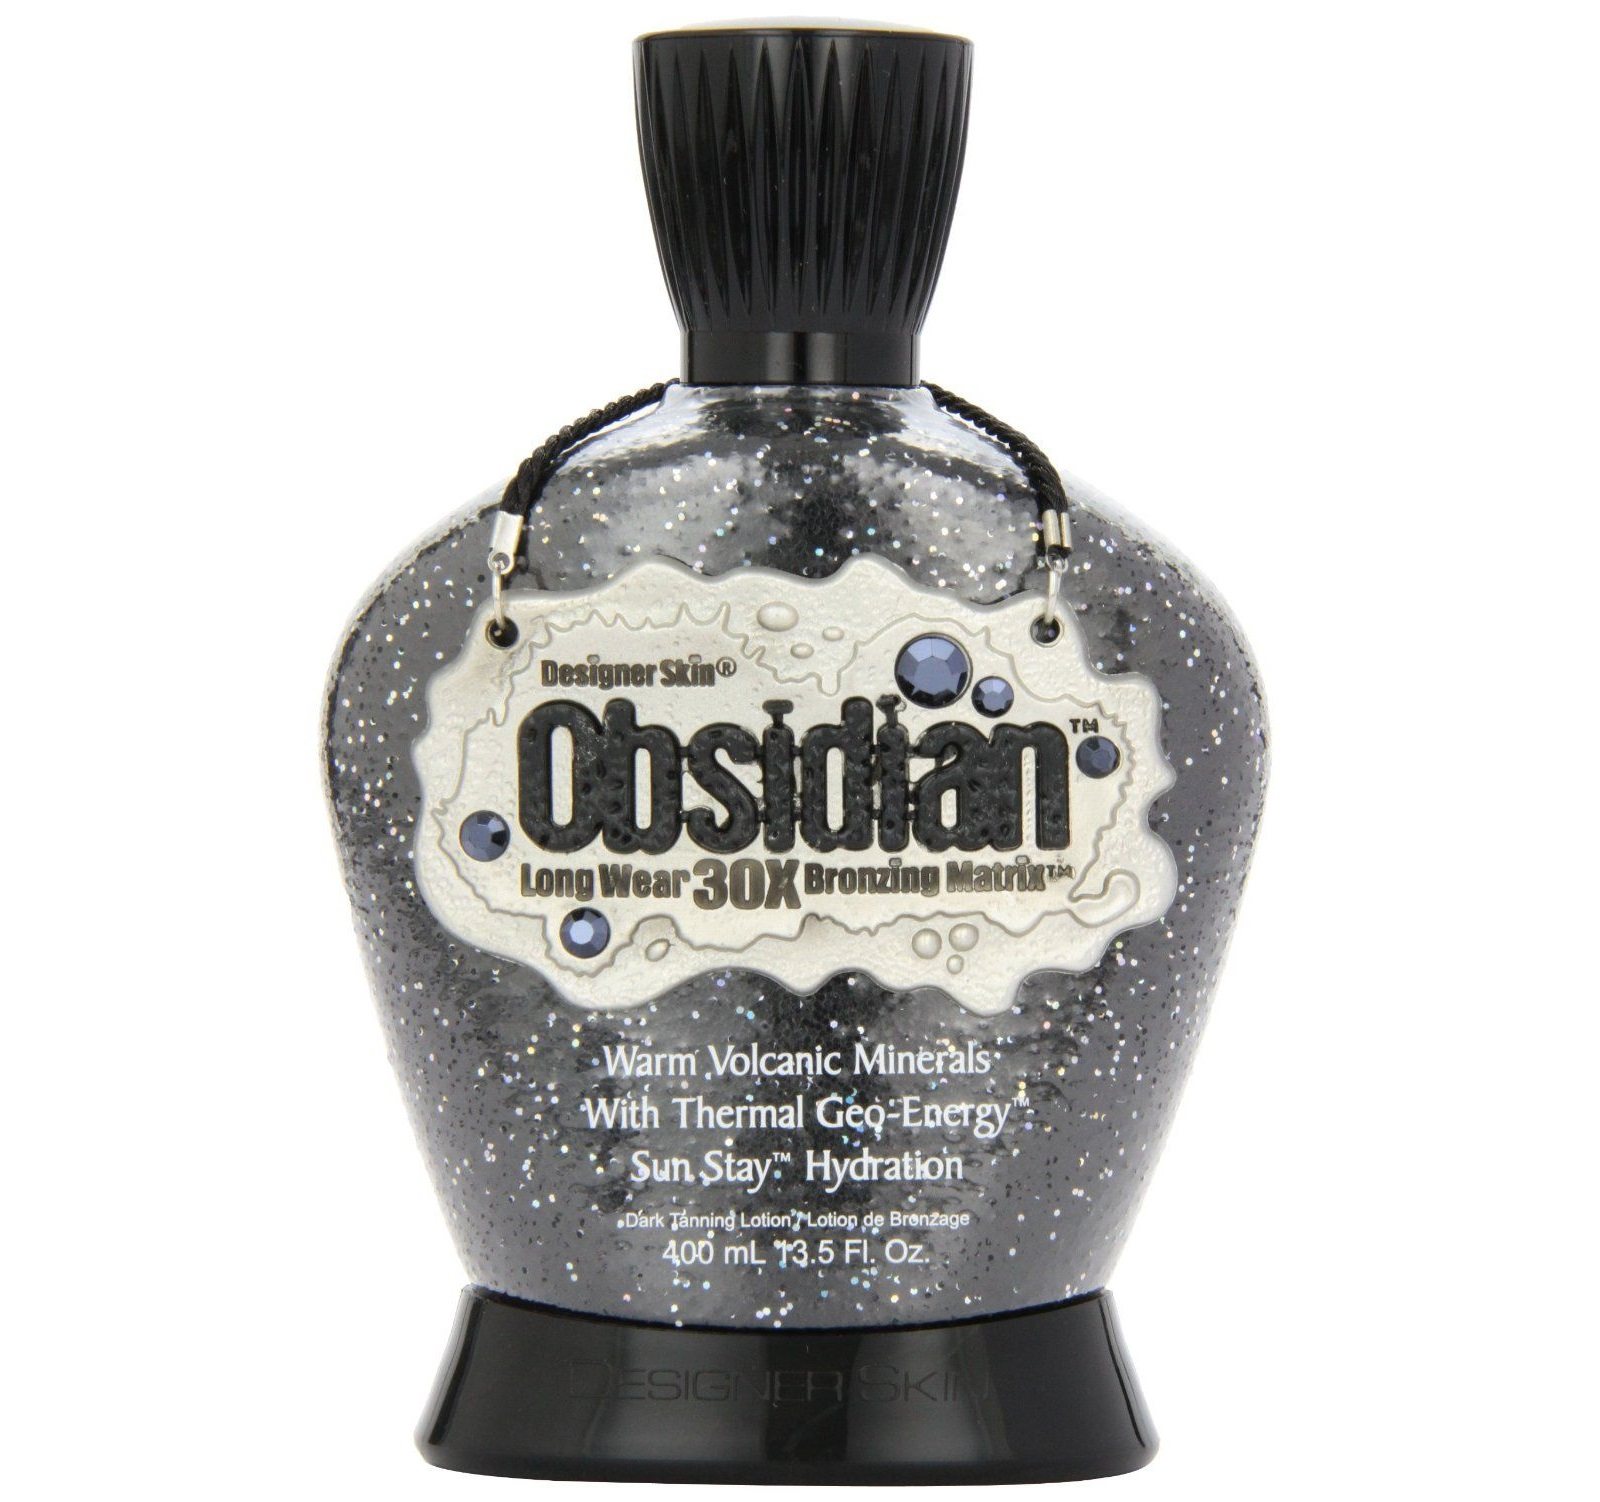 10-obsidian-tanning-lotion-facts